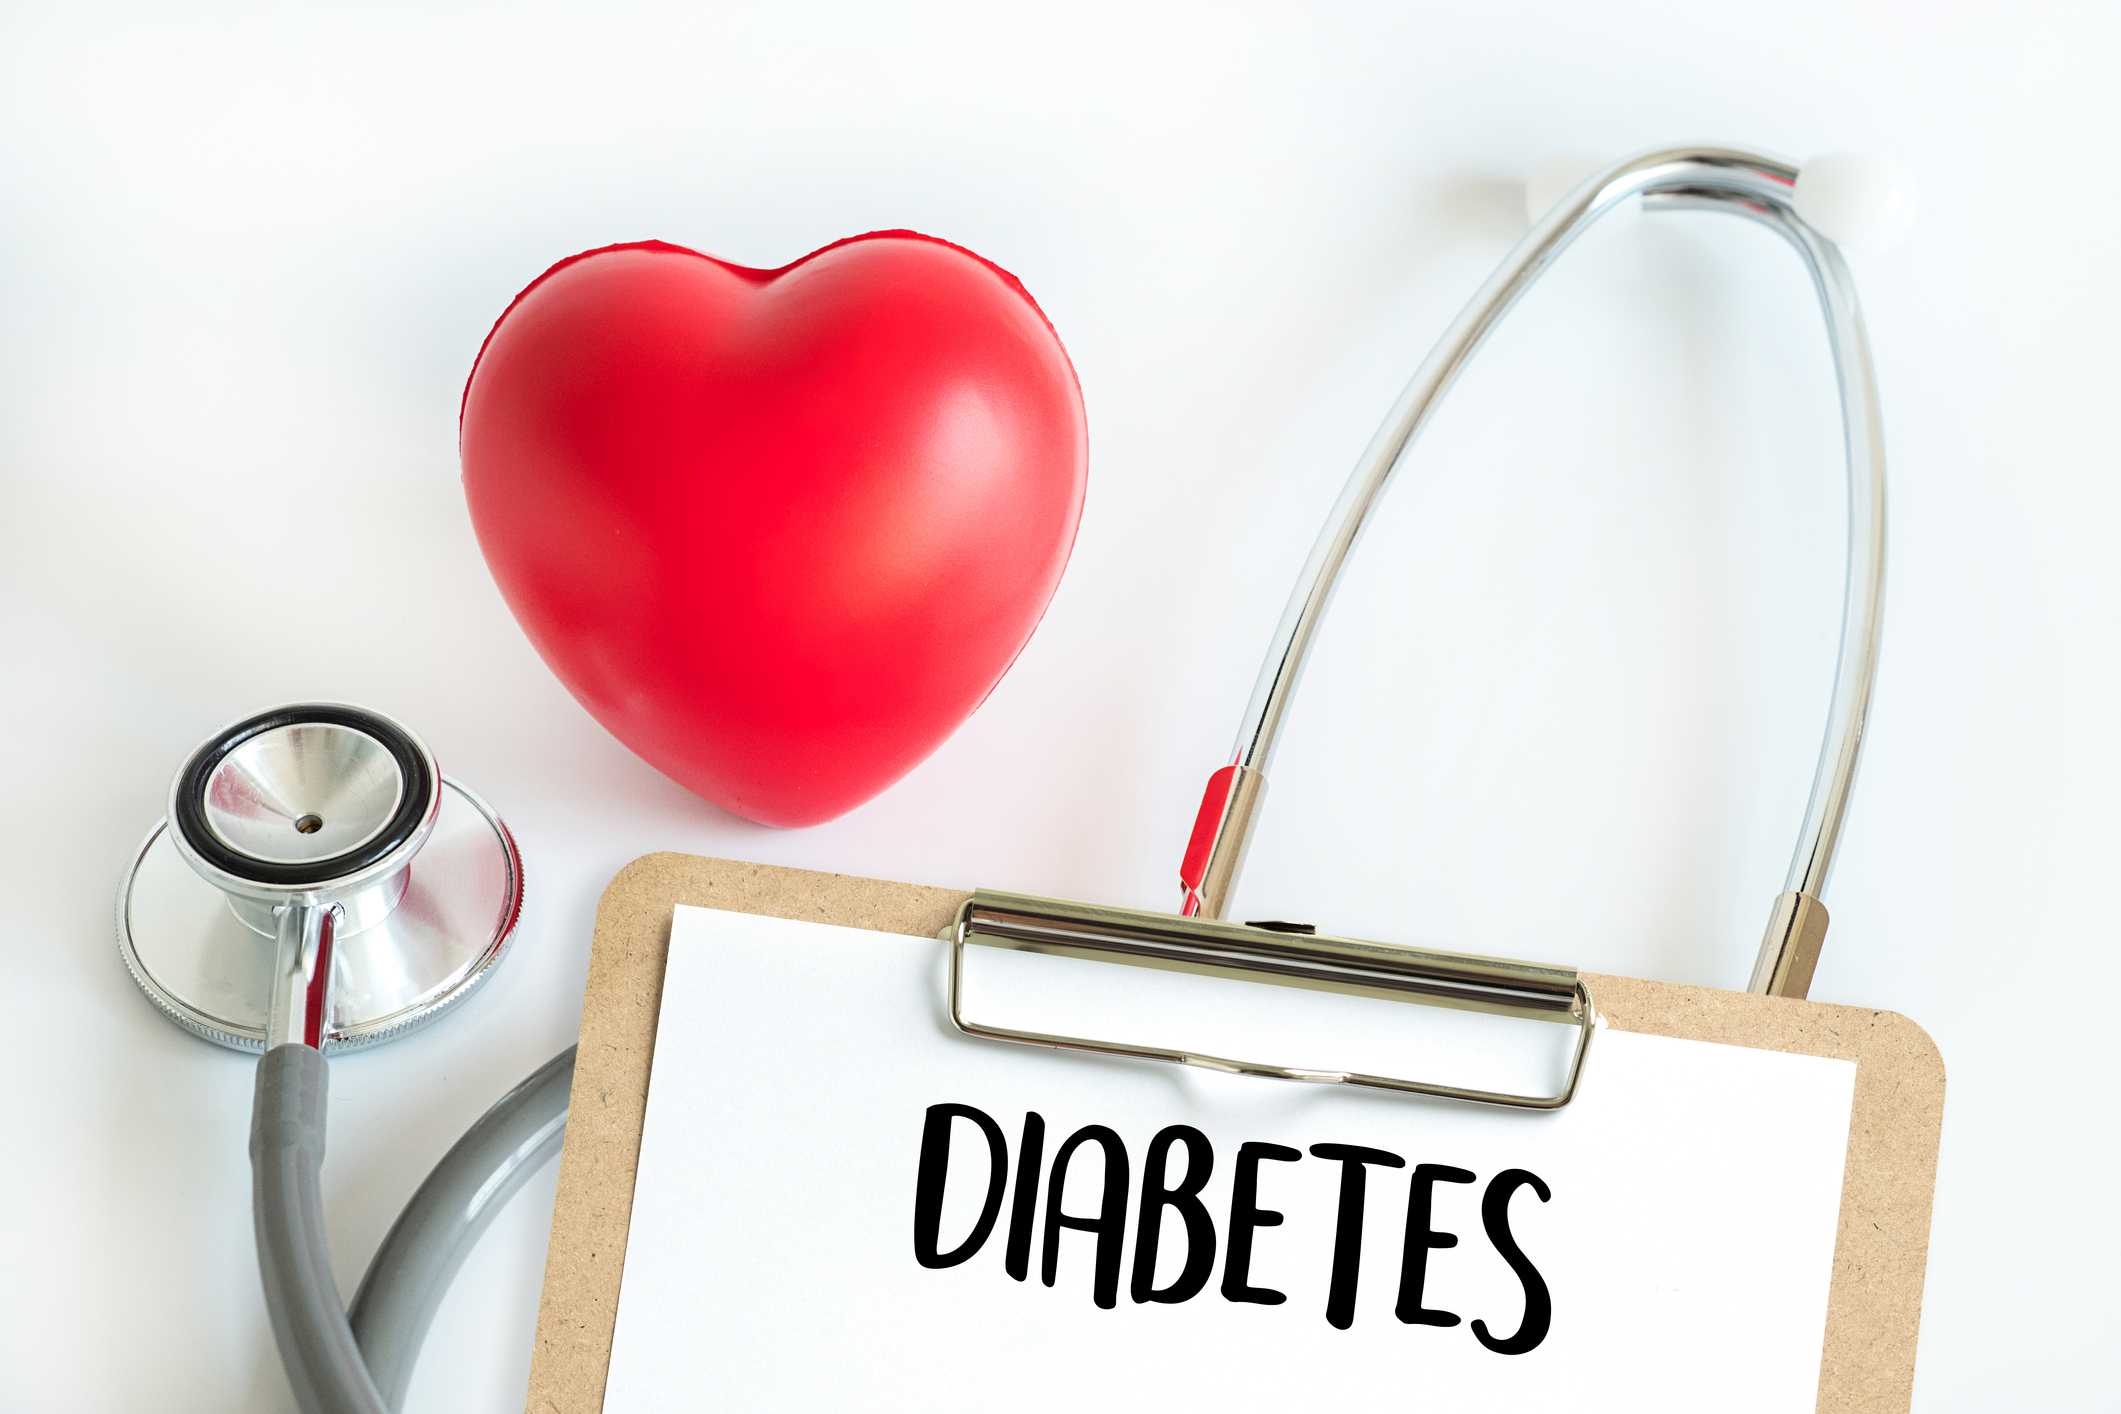 COVID-19 and Diabetes: Blood Sugar Control May Help Improve Outcomes